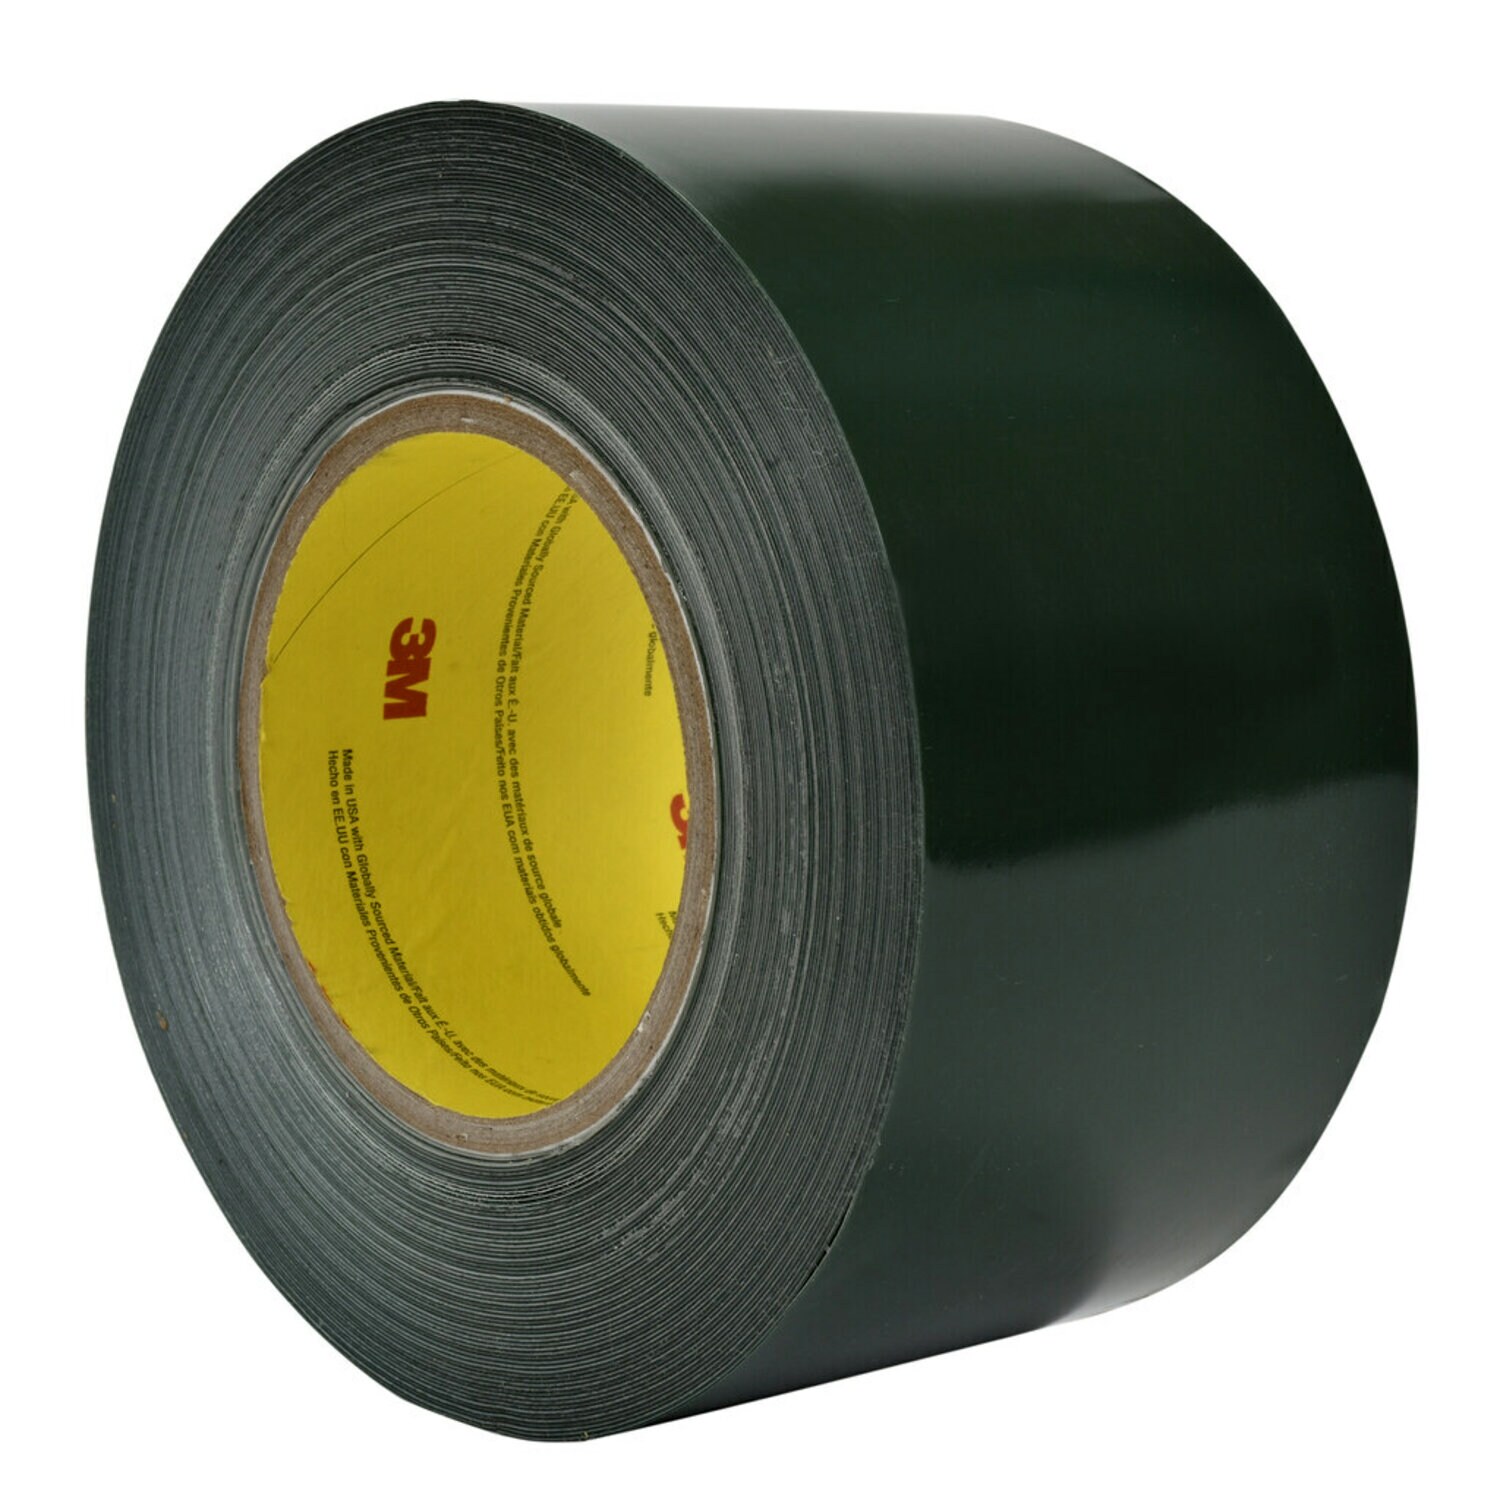 00076308987510, 3M Sealing and Holding Tape 8069, 1 in x 25 yd, 36 rolls  per case, Solid Liner, Aircraft products, sealing-tapes